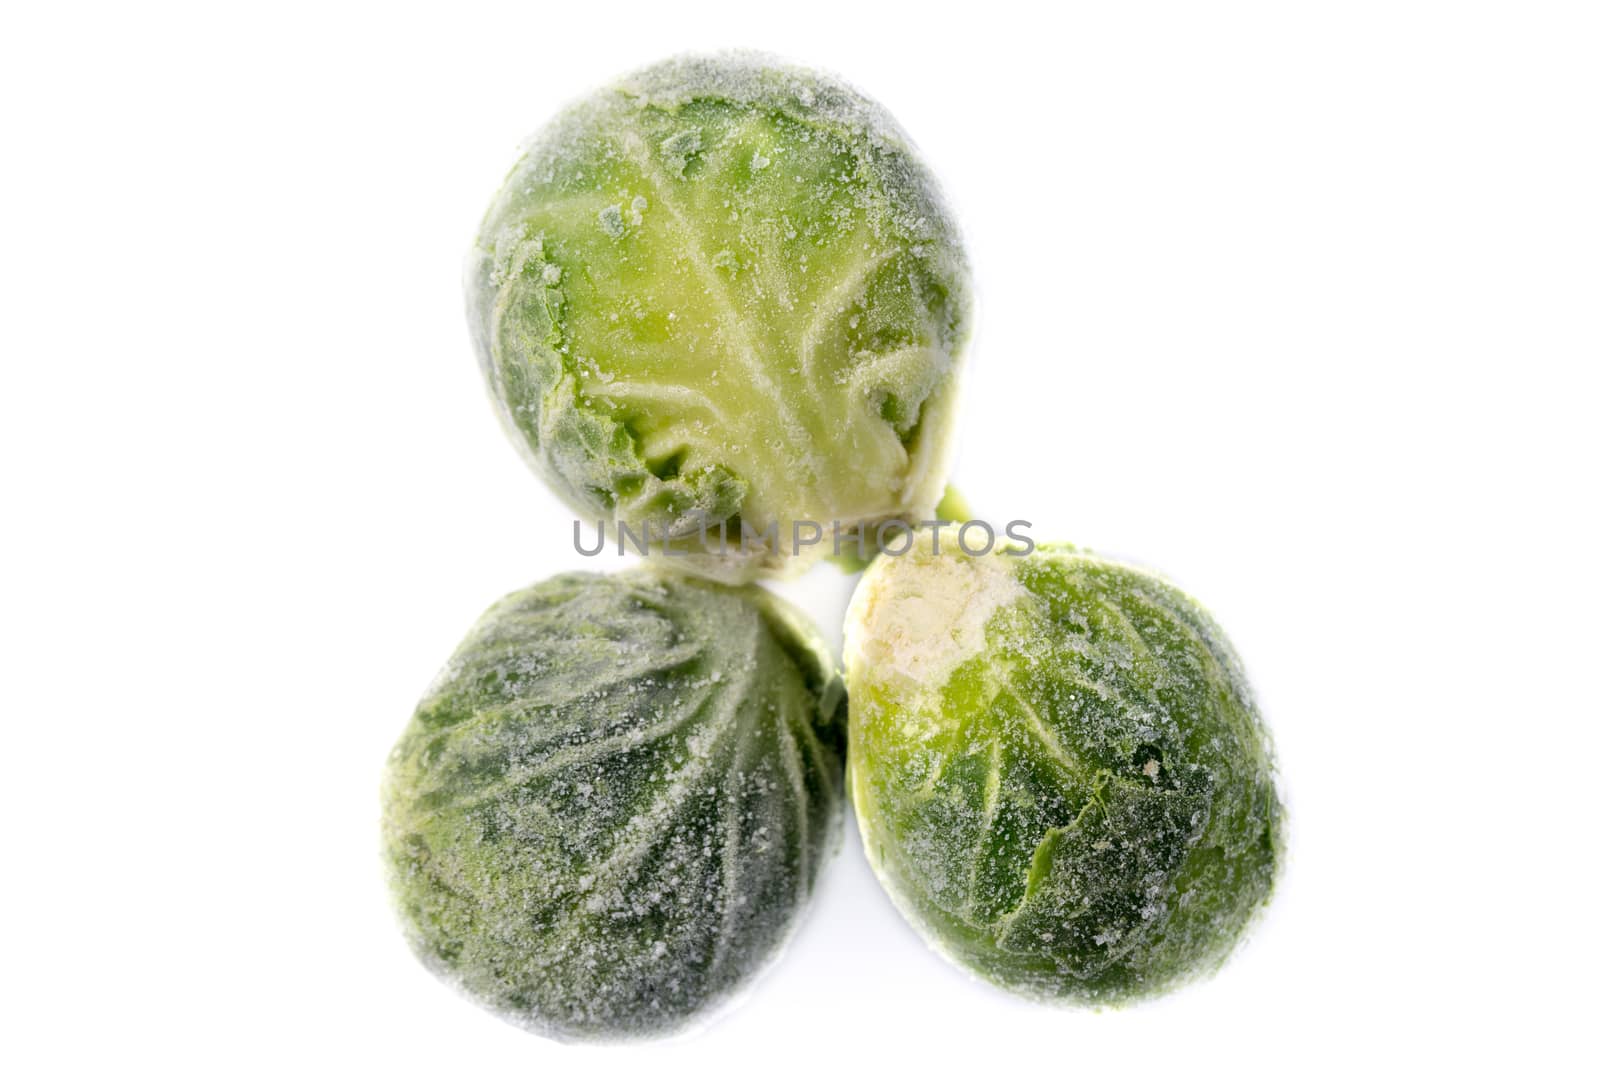 Picture of three single frozen green sprouts